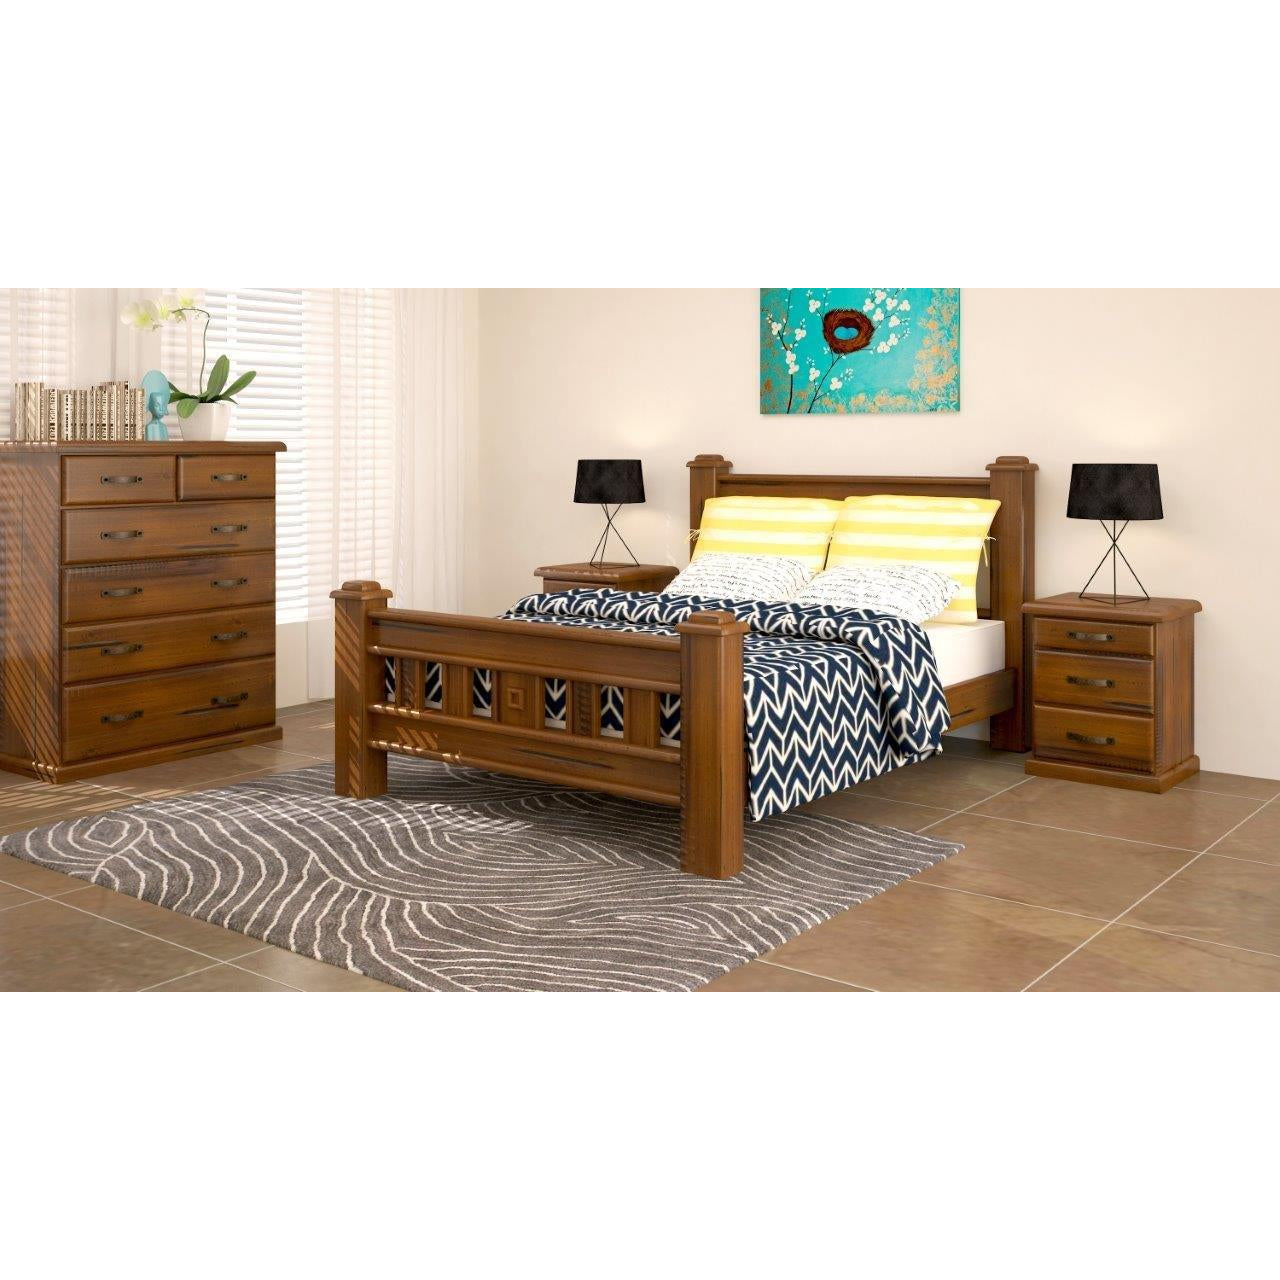 Back In Stock! Queen Size Bed Base Solid Pine - Dark Brown